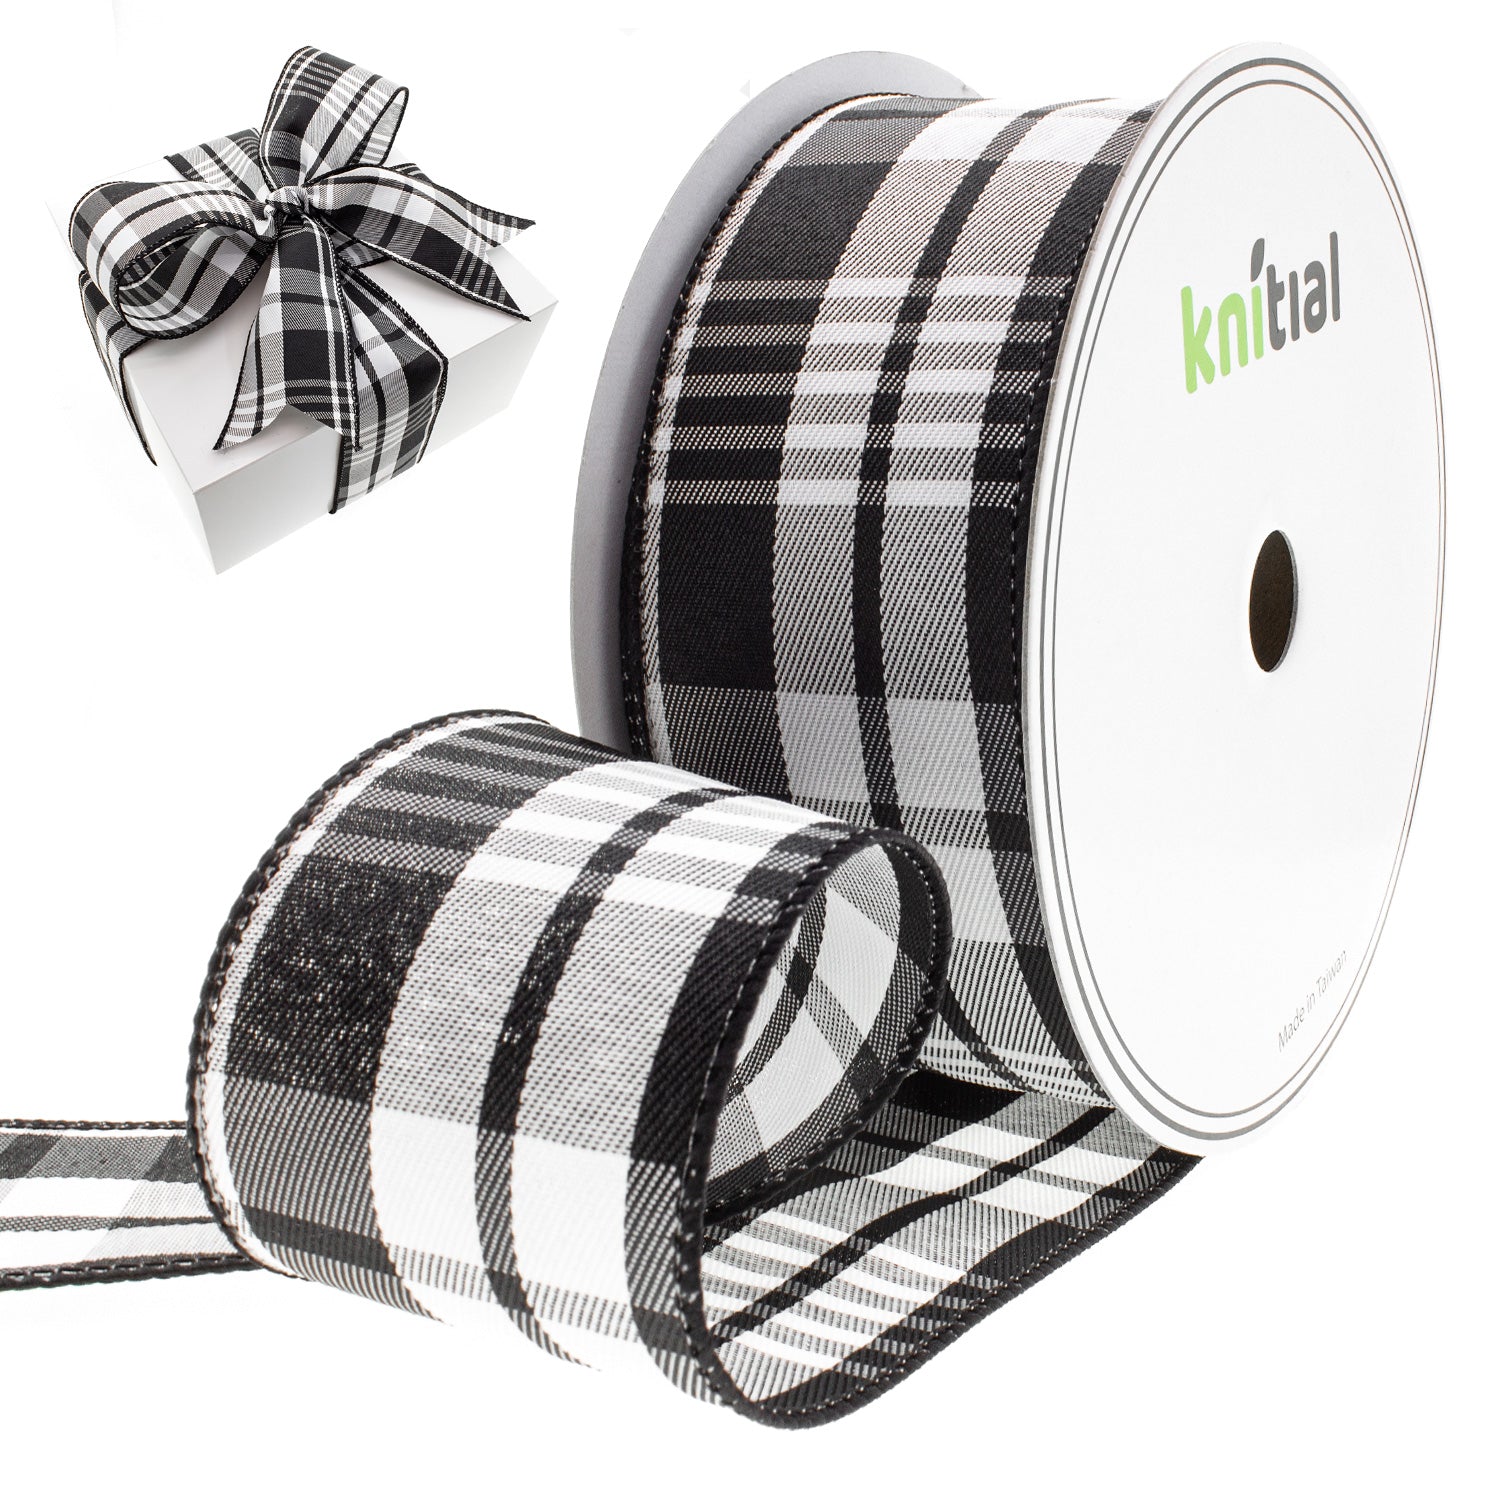 Knitial Wired Black and White Plaid Ribbon 2-1/2" x 25 Yards